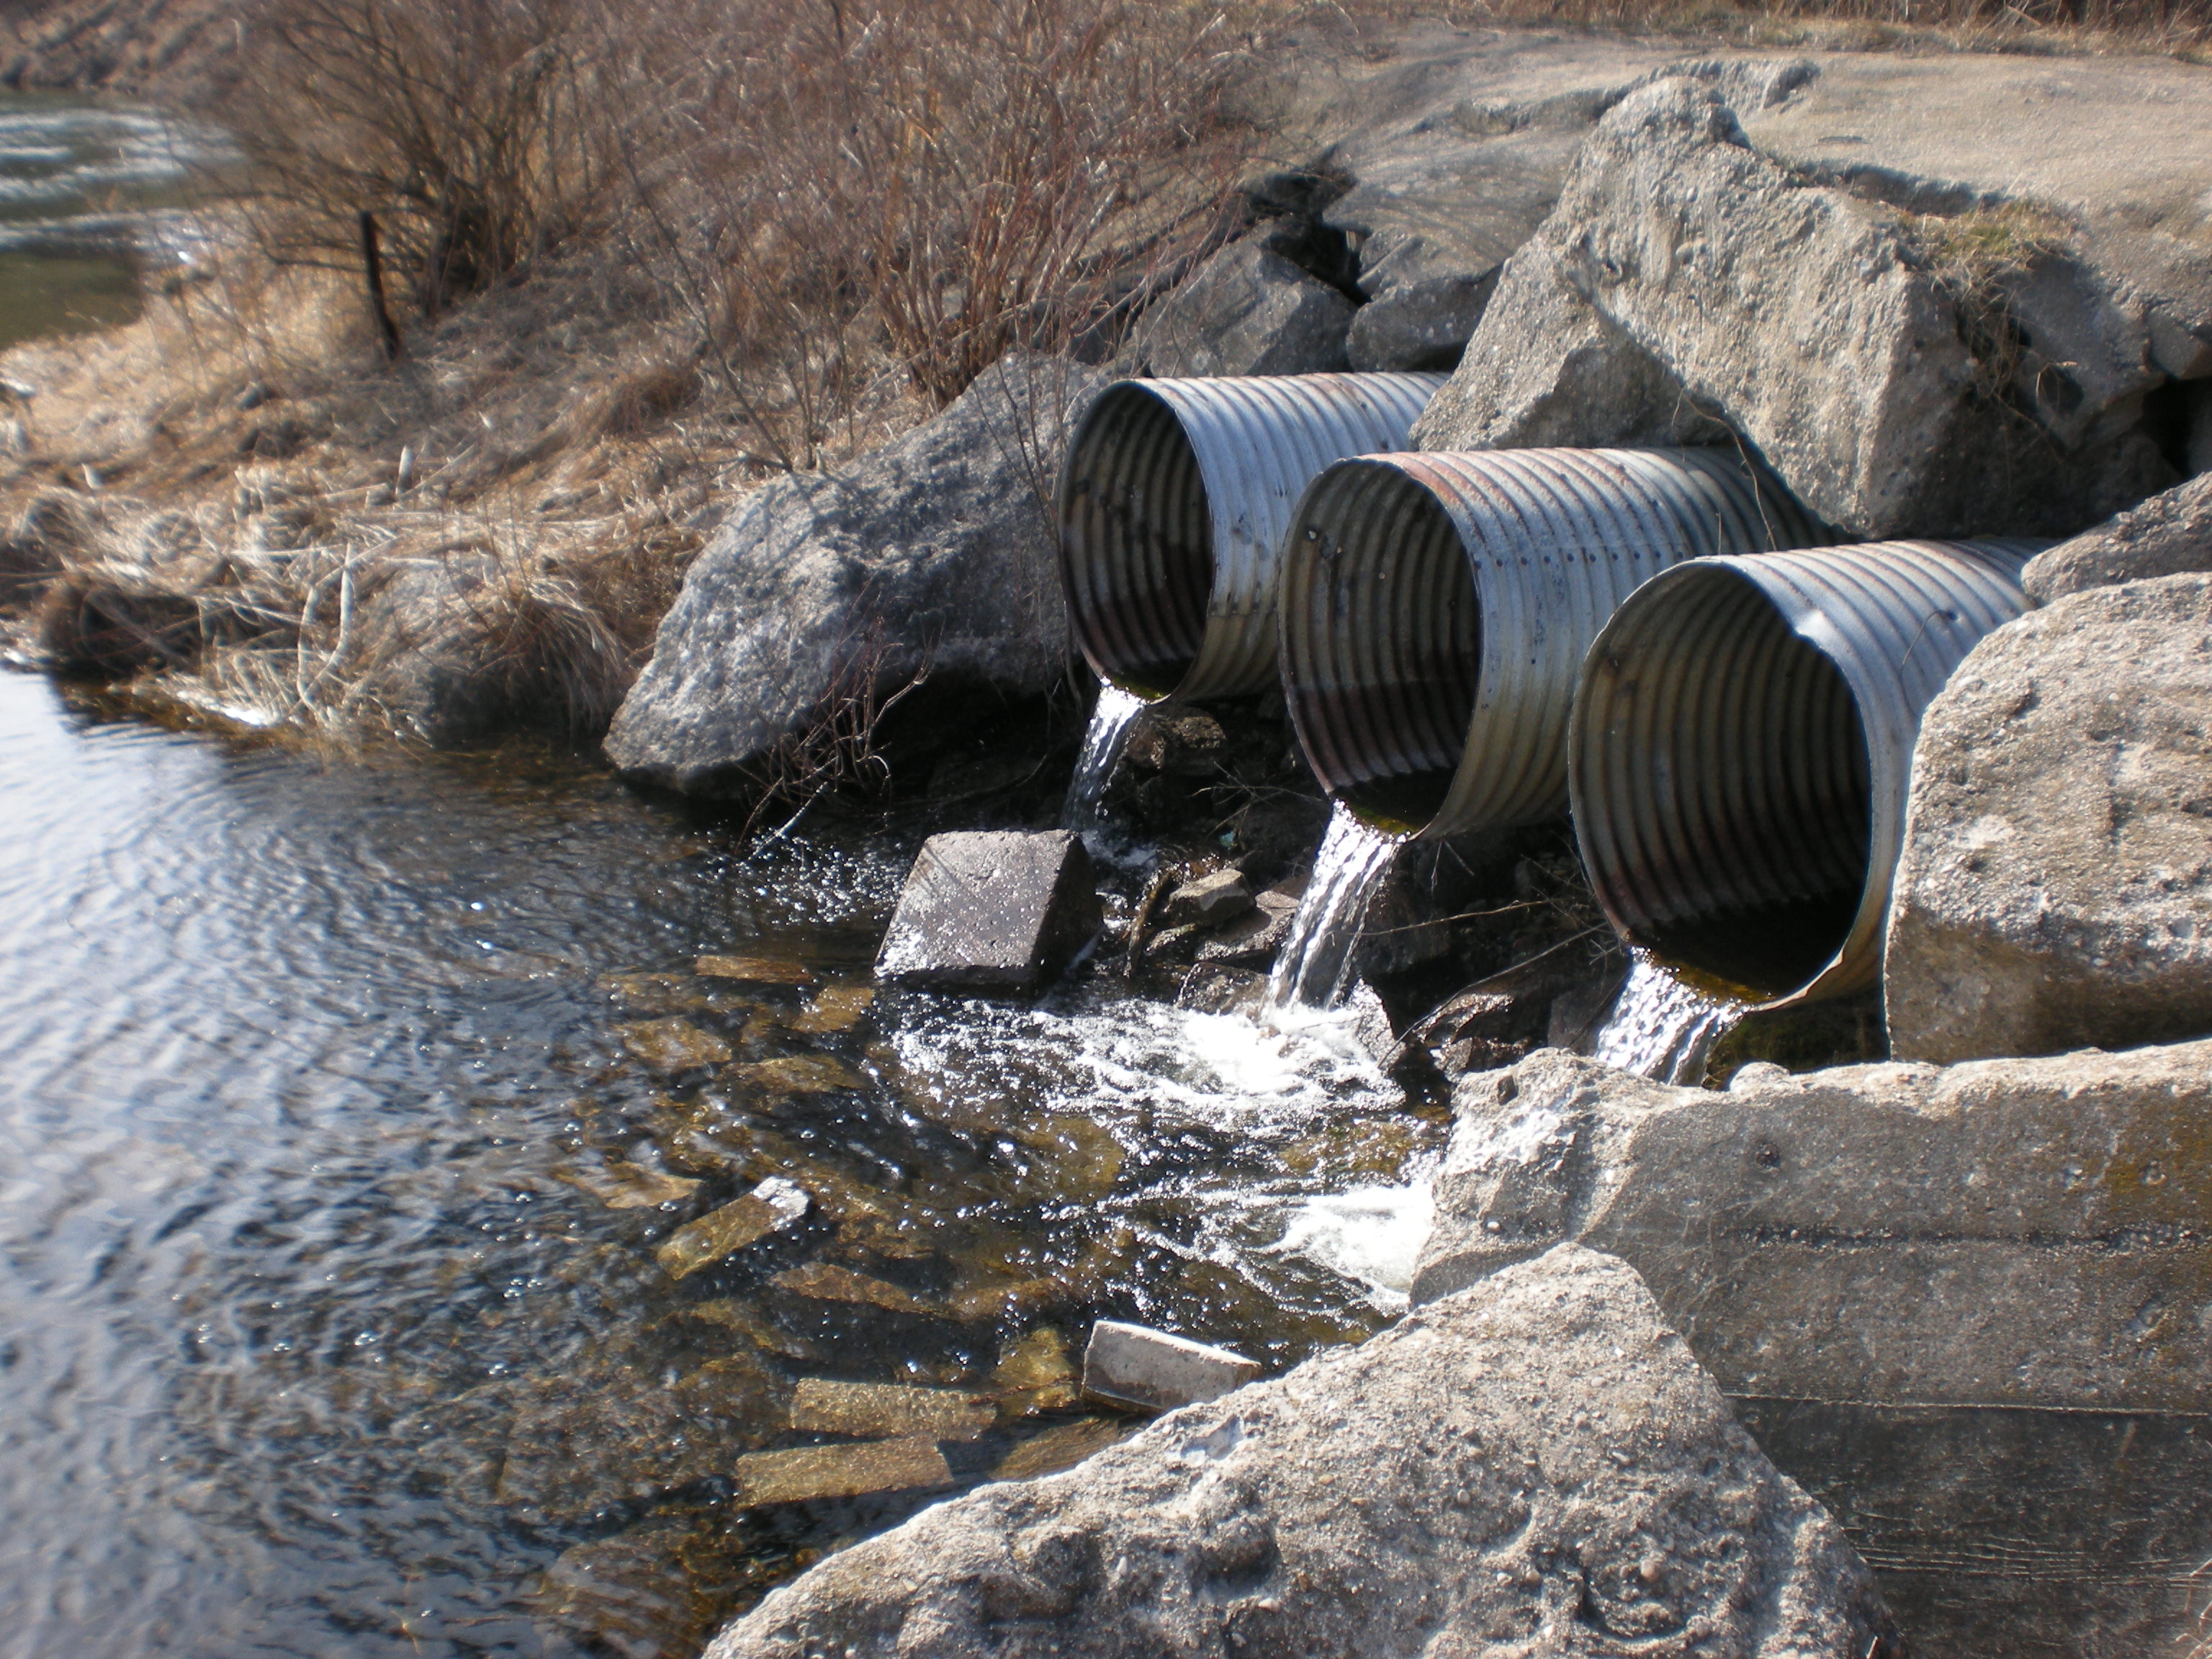 "Three Pipes" - a popular stop for canoeists and kayakers